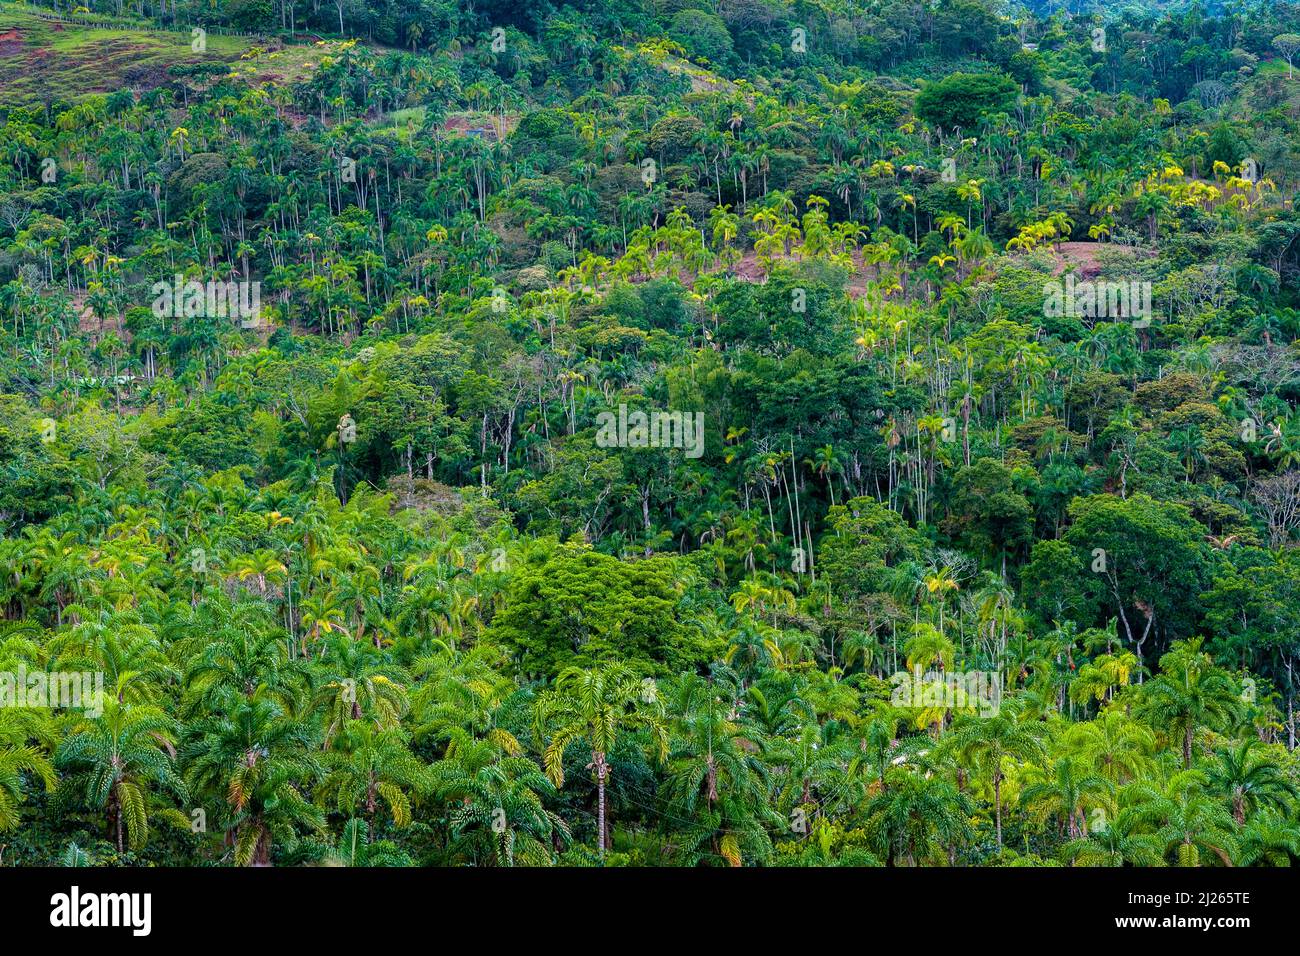 Peach palms are seen growing at a plantation on the mountainside near El Tambo, Cauca, Colombia. Stock Photo